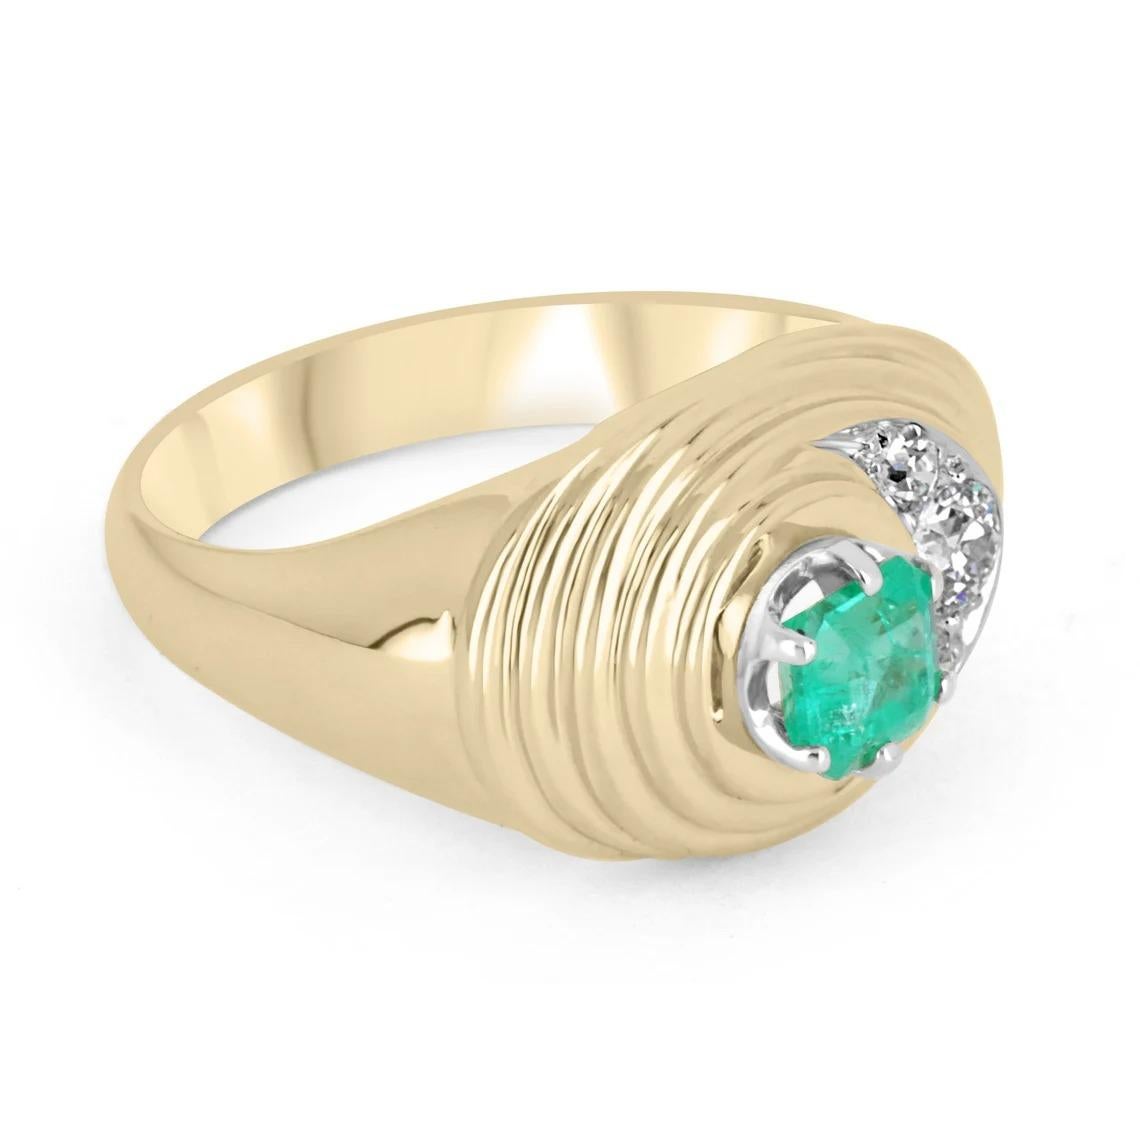 Setting Style: Prong/Pave
Setting Material: 14K Yellow Gold
Setting Weight: 10.9 Grams

Main Stone: Emerald
Shape: Asscher Cut
Weight: 0.90-Carats
Clarity: Transparent
Color: Green
Luster: Excellent-Very Good
Treatments: Natural, Oiling
Origin: